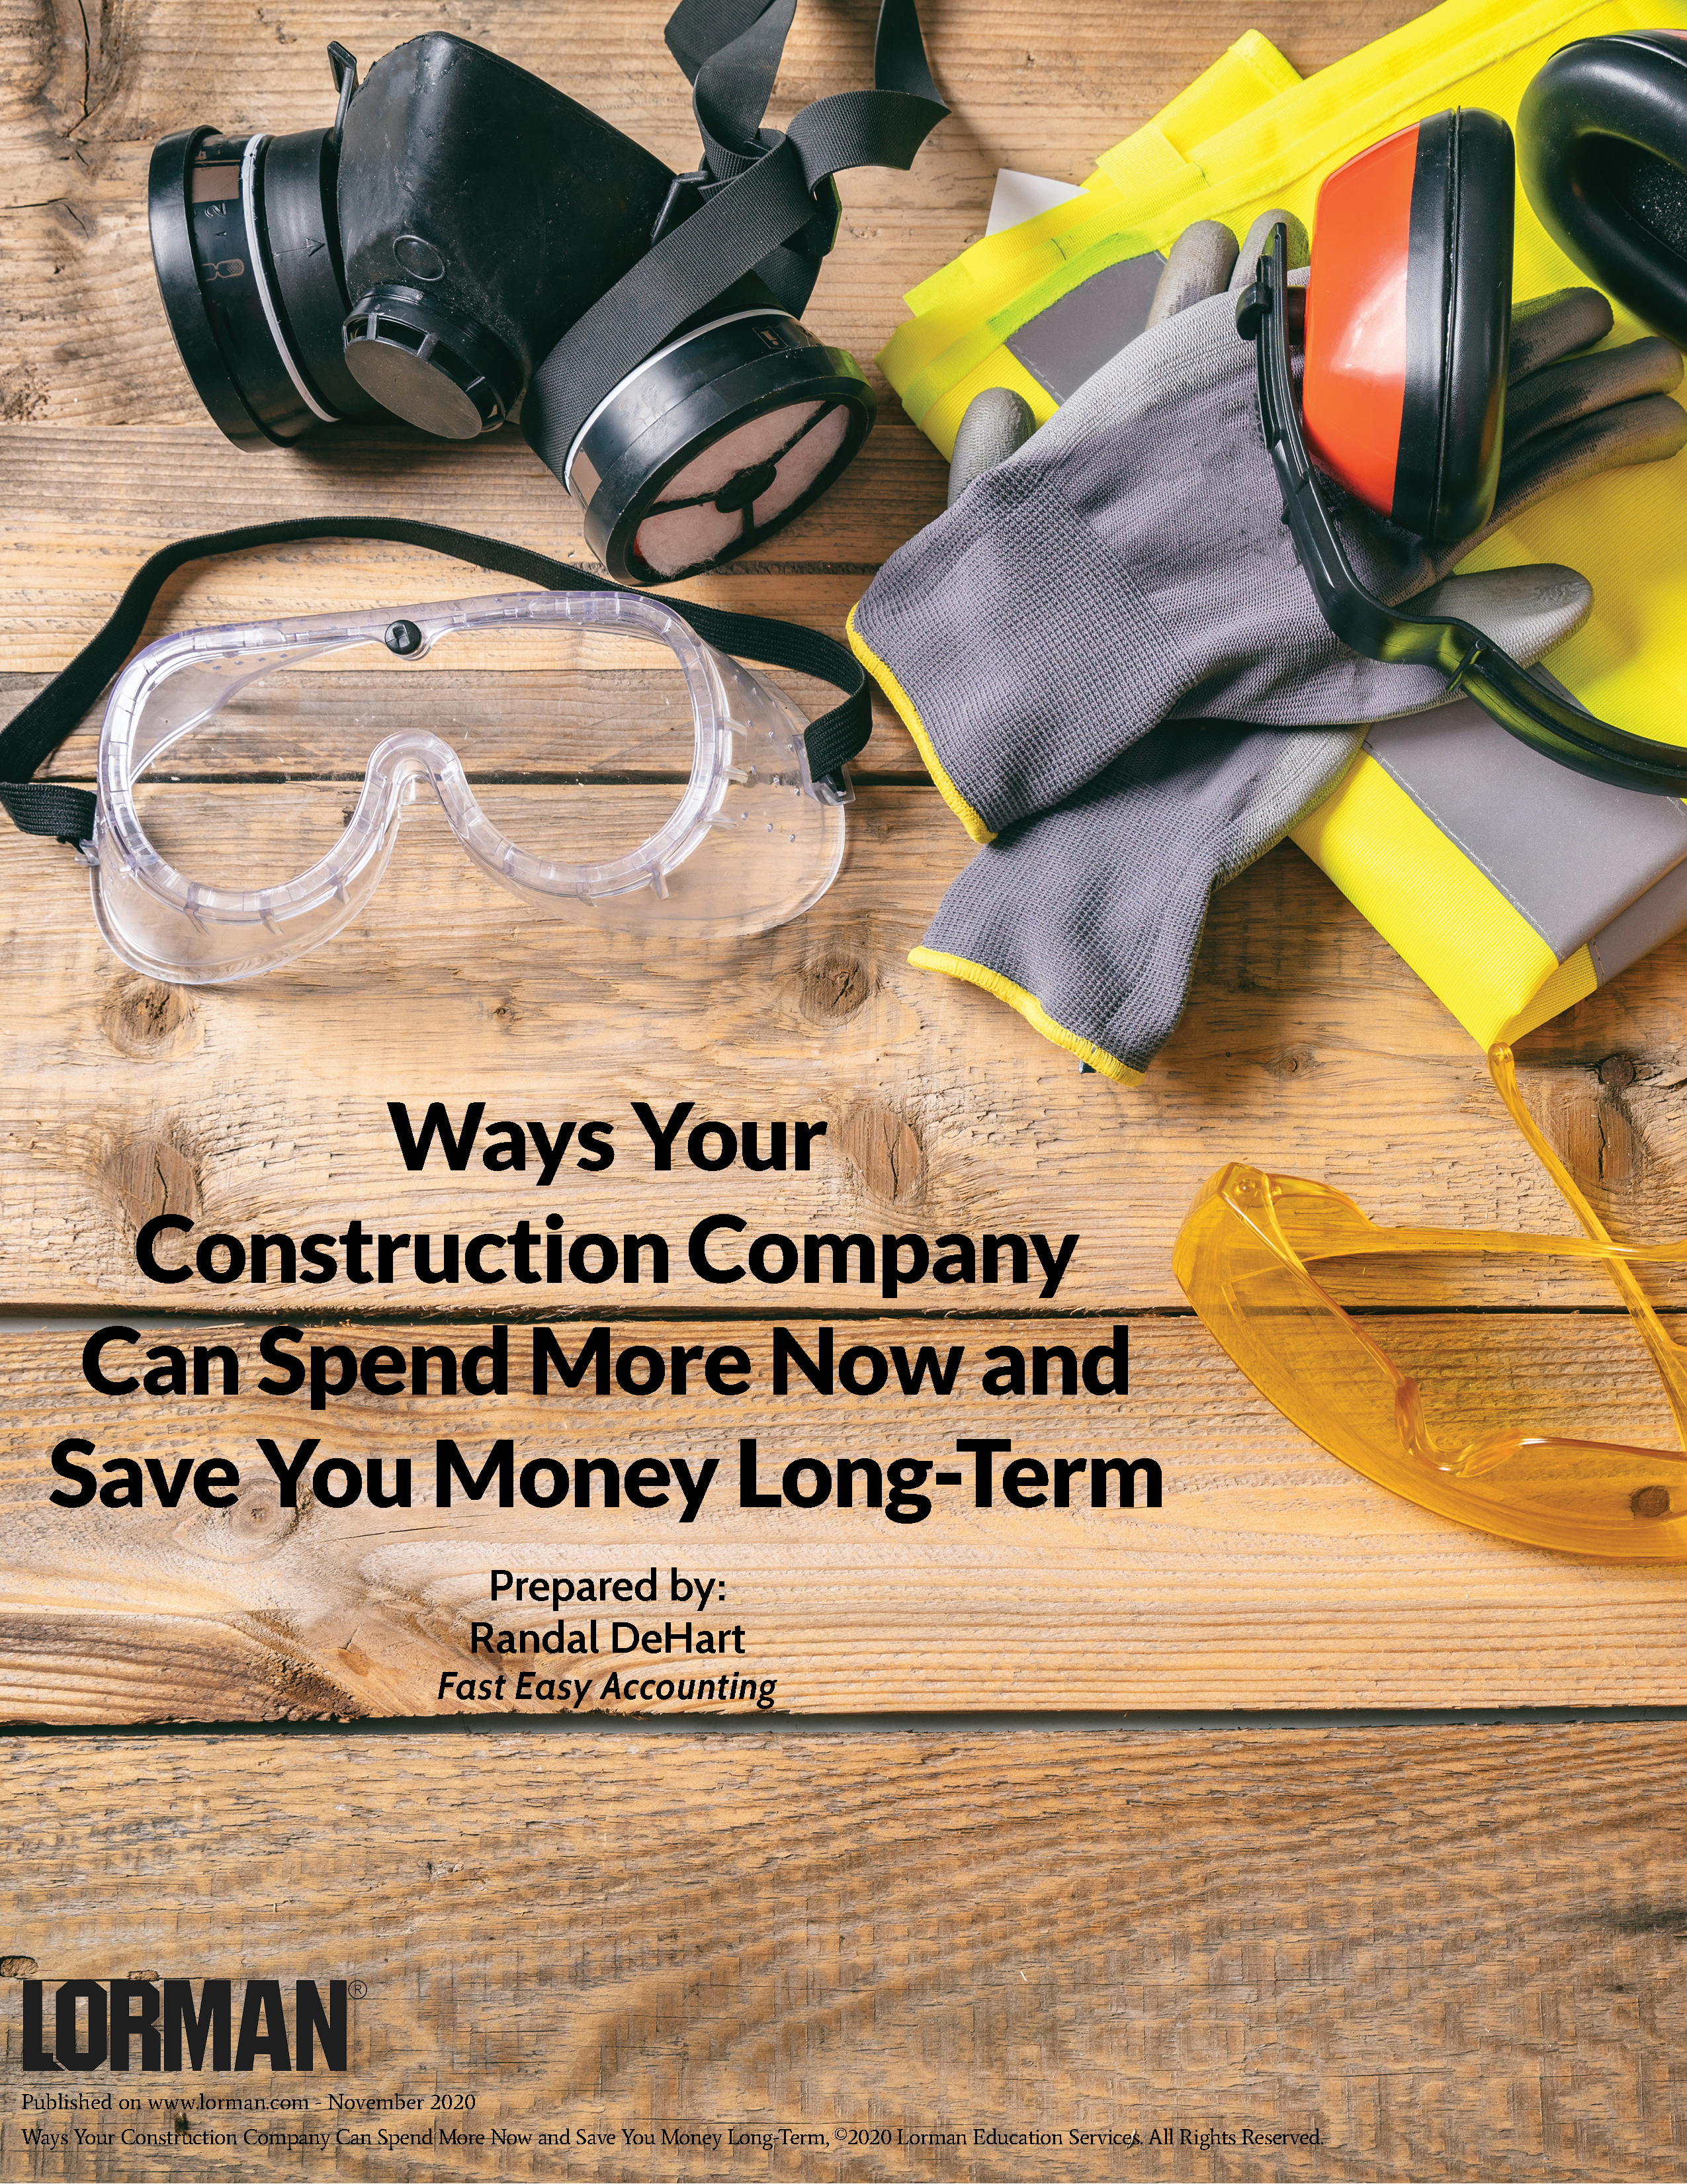 Ways Your Construction Company Can Spend More Now and Save You Money Long-Term